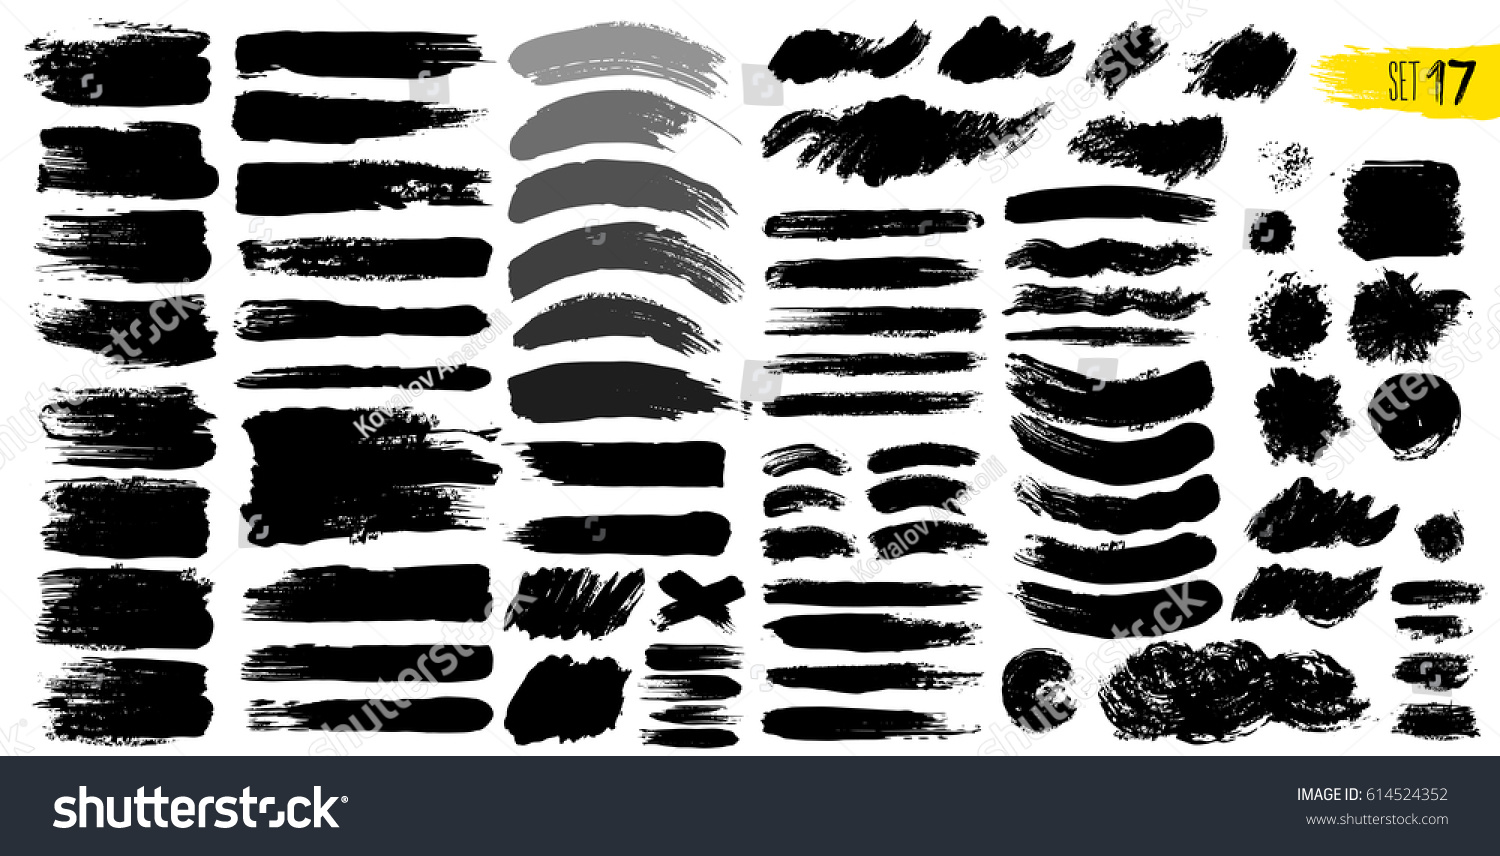 Big collection of black paint, ink brush strokes, brushes, lines. Dirty artistic design elements, boxes, frames. Vector illustration. Isolated on white background. Freehand drawing. #614524352